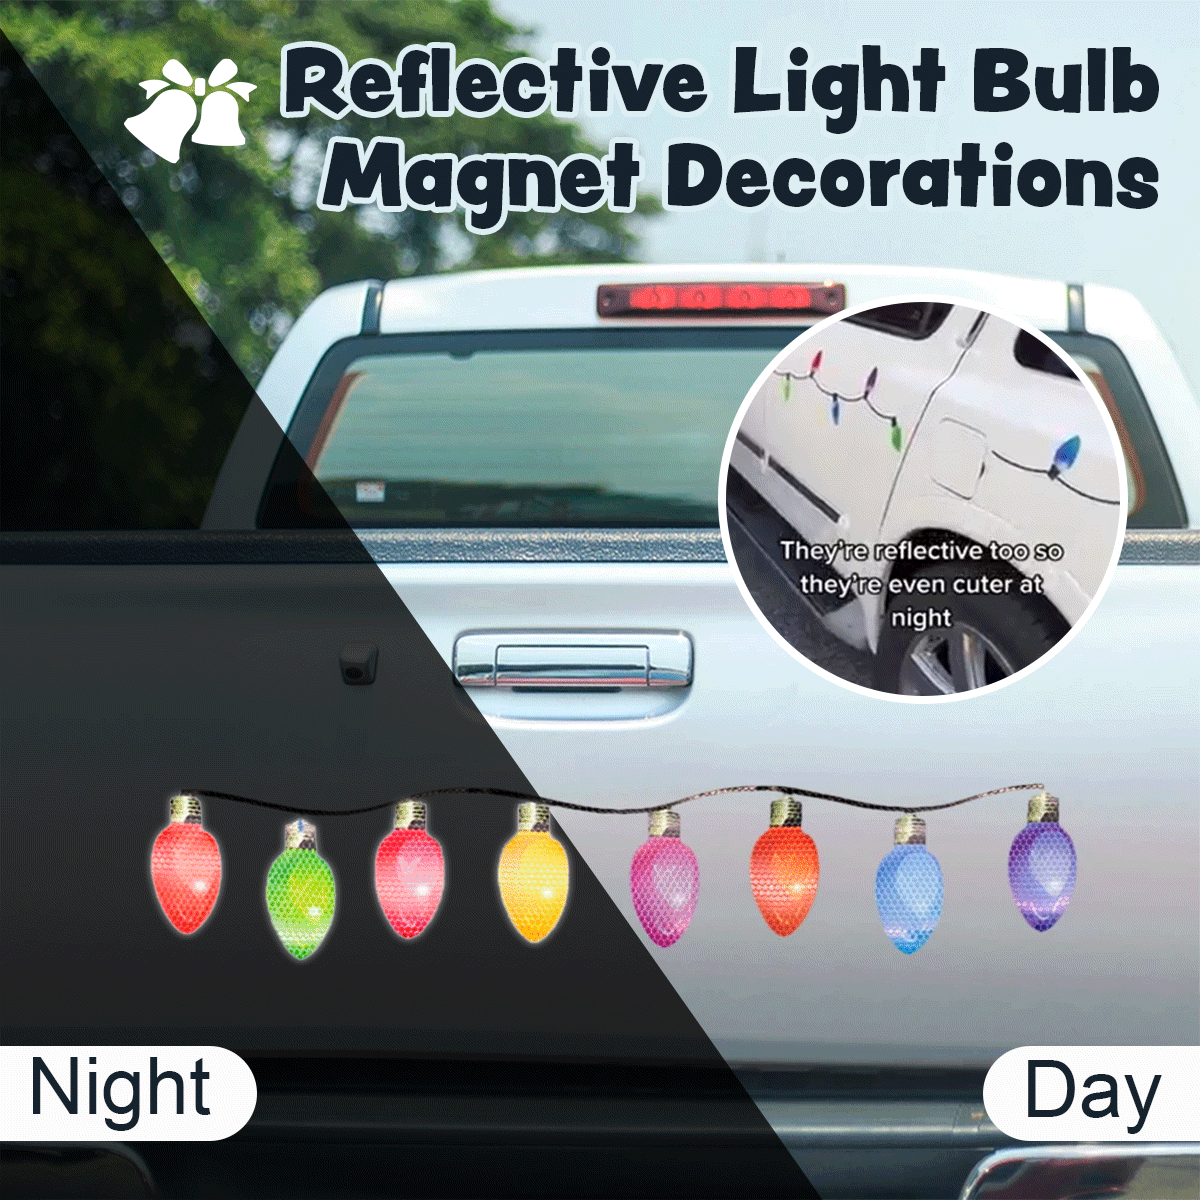 Colorful Christmas light bulb magnets adorning a car